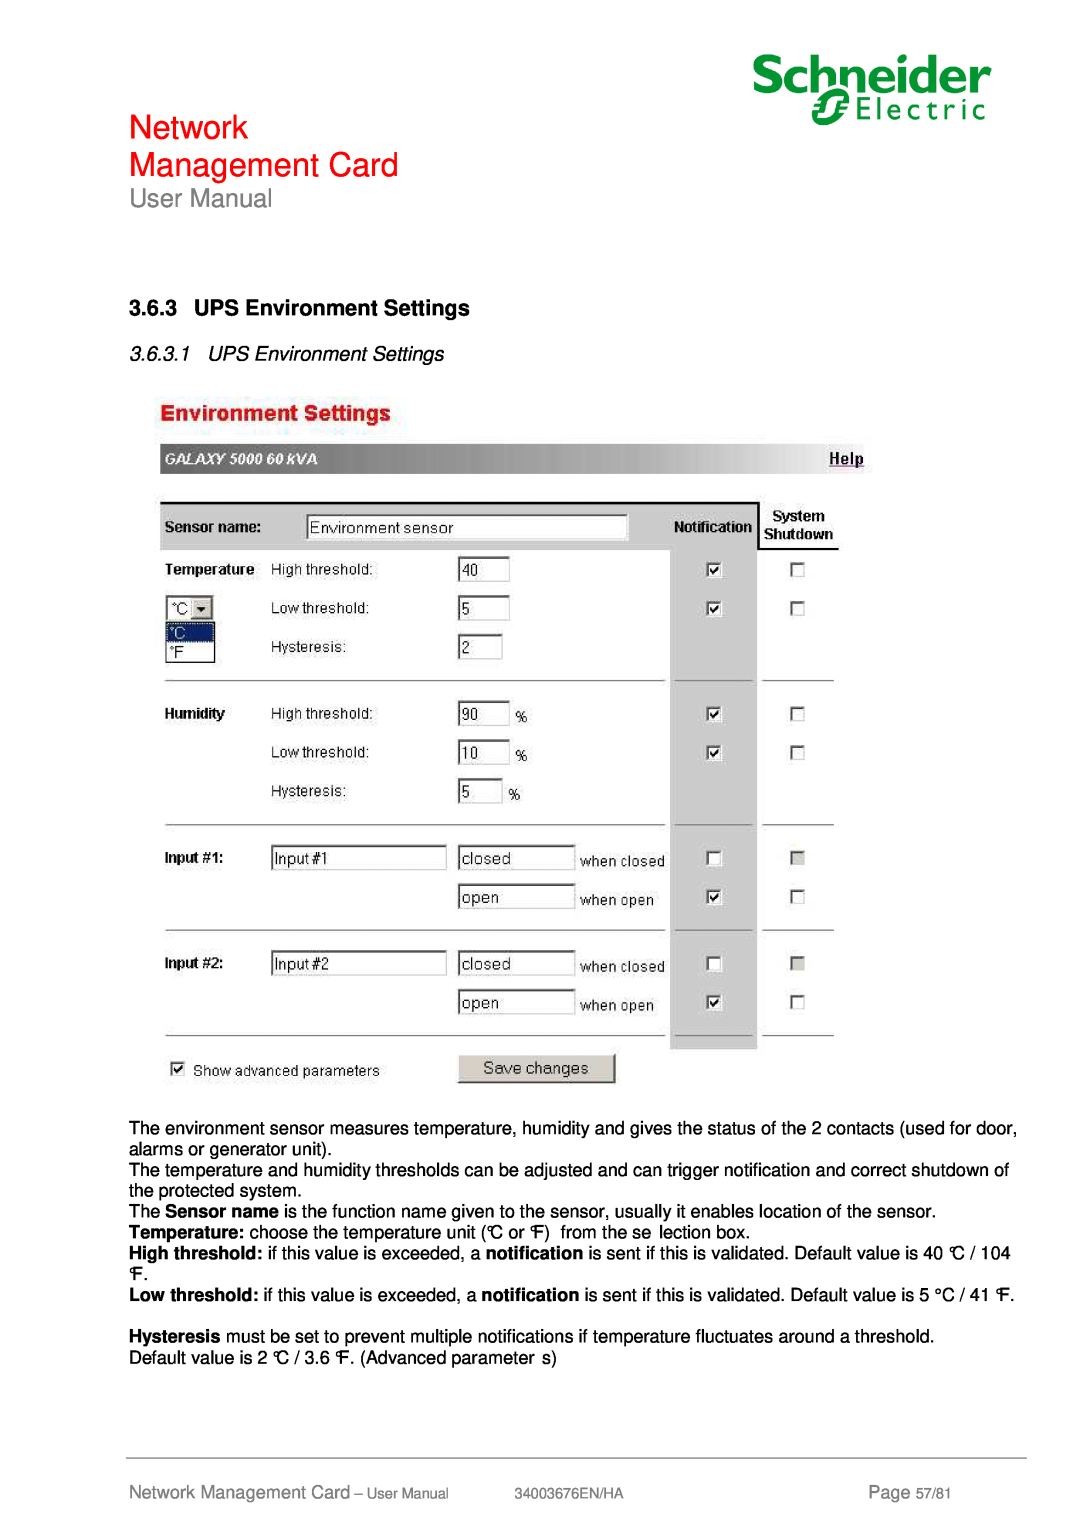 Schneider Electric 66074, 66846 user manual UPS Environment Settings, Network Management Card, User Manual, Page 57/81 